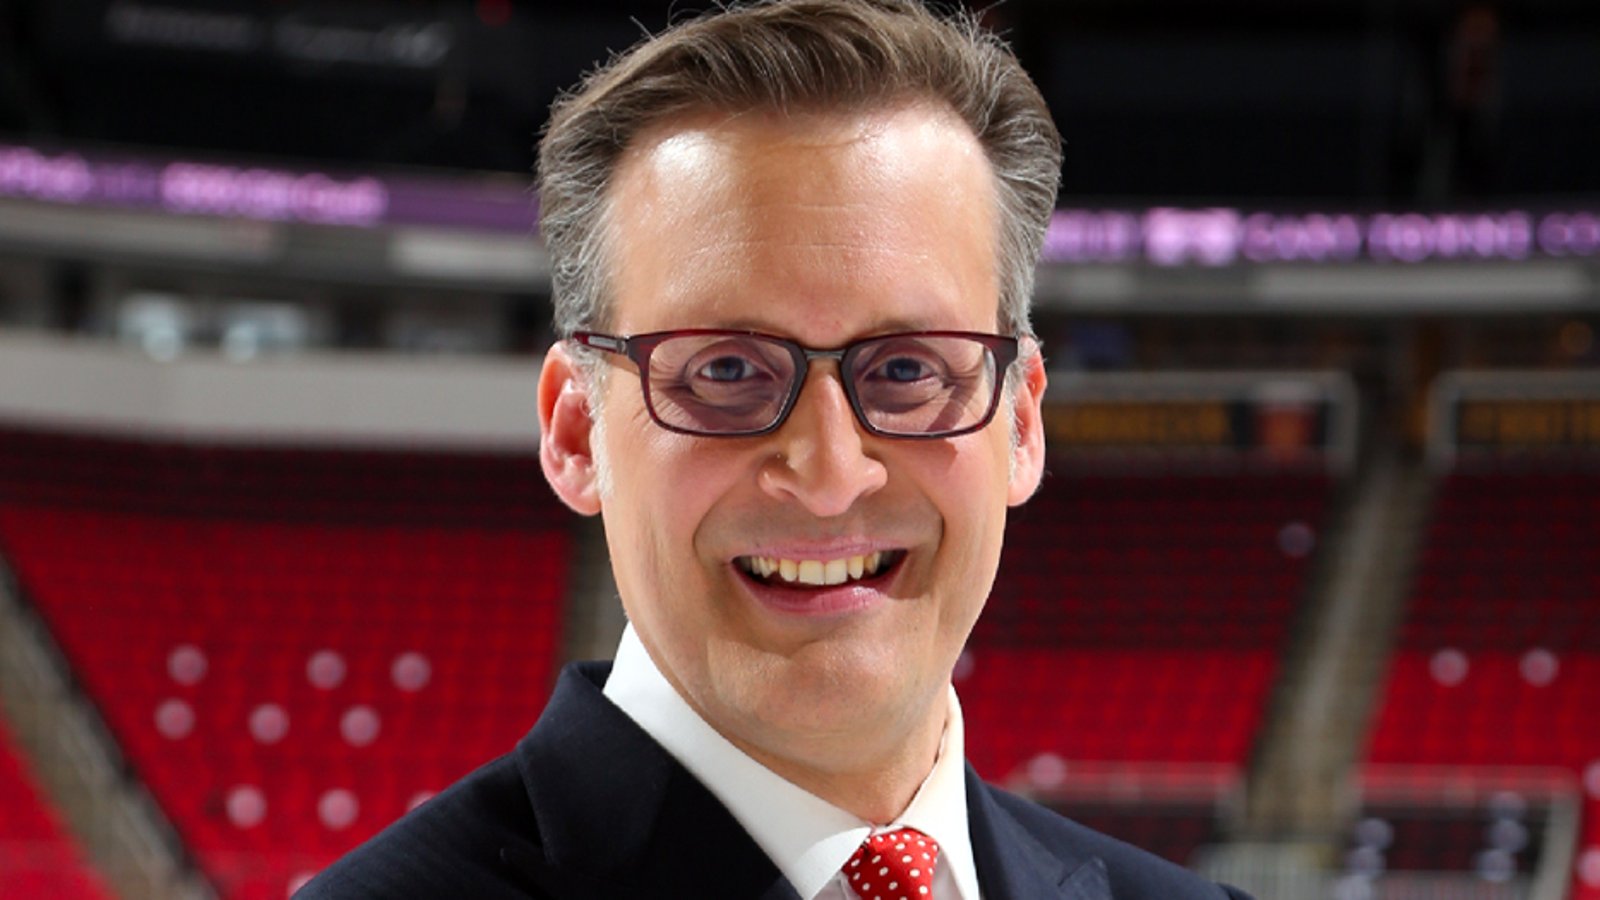 Longtime Hurricanes announcer John Forslund is officially out